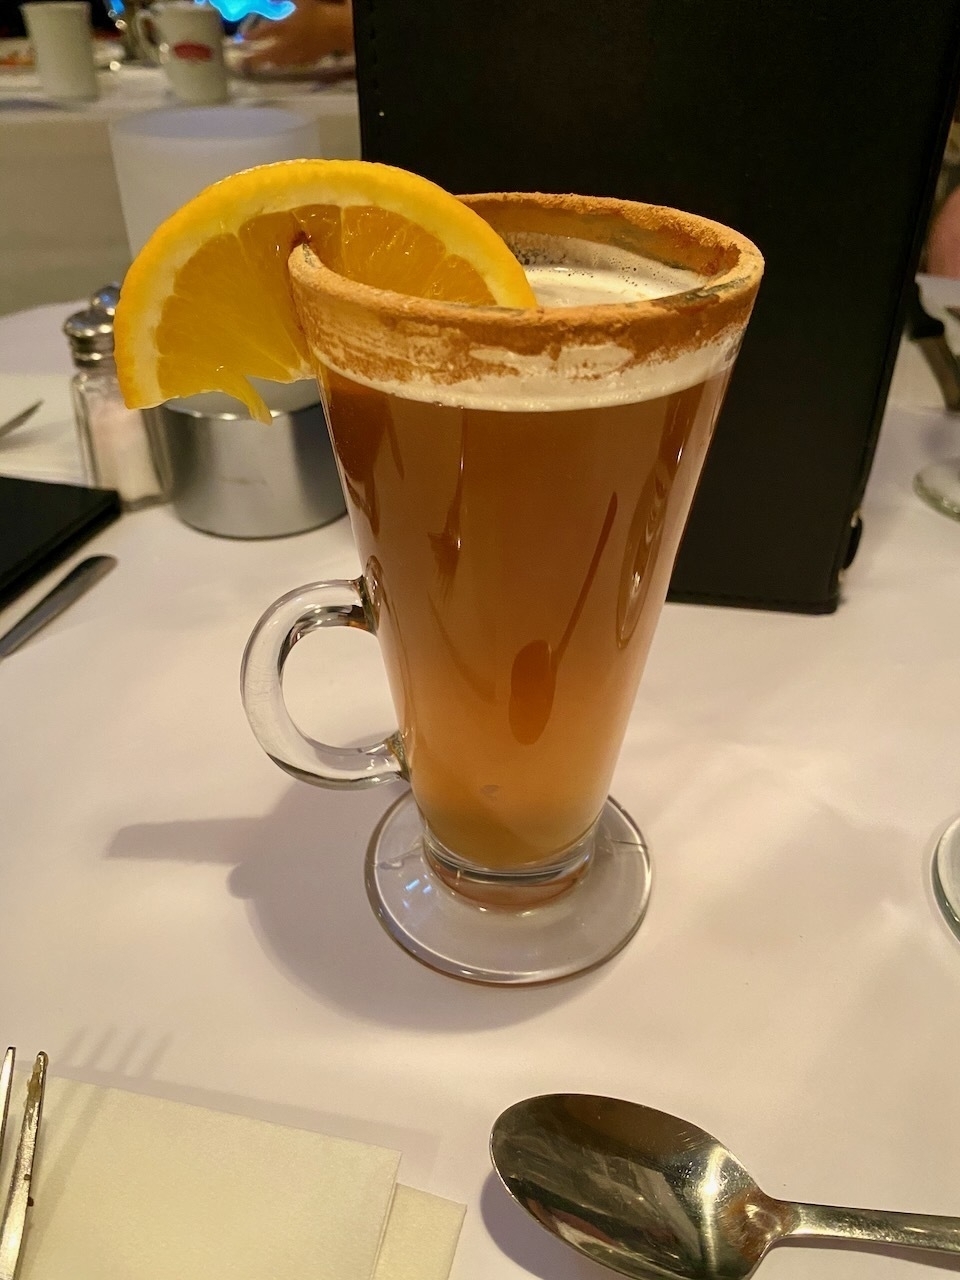 Cider in a glass, the rim dusted with cinnamon powder, with a vertical orange slice on the lip of the glass, on a white-cloth covered table with a spoon in the foreground.